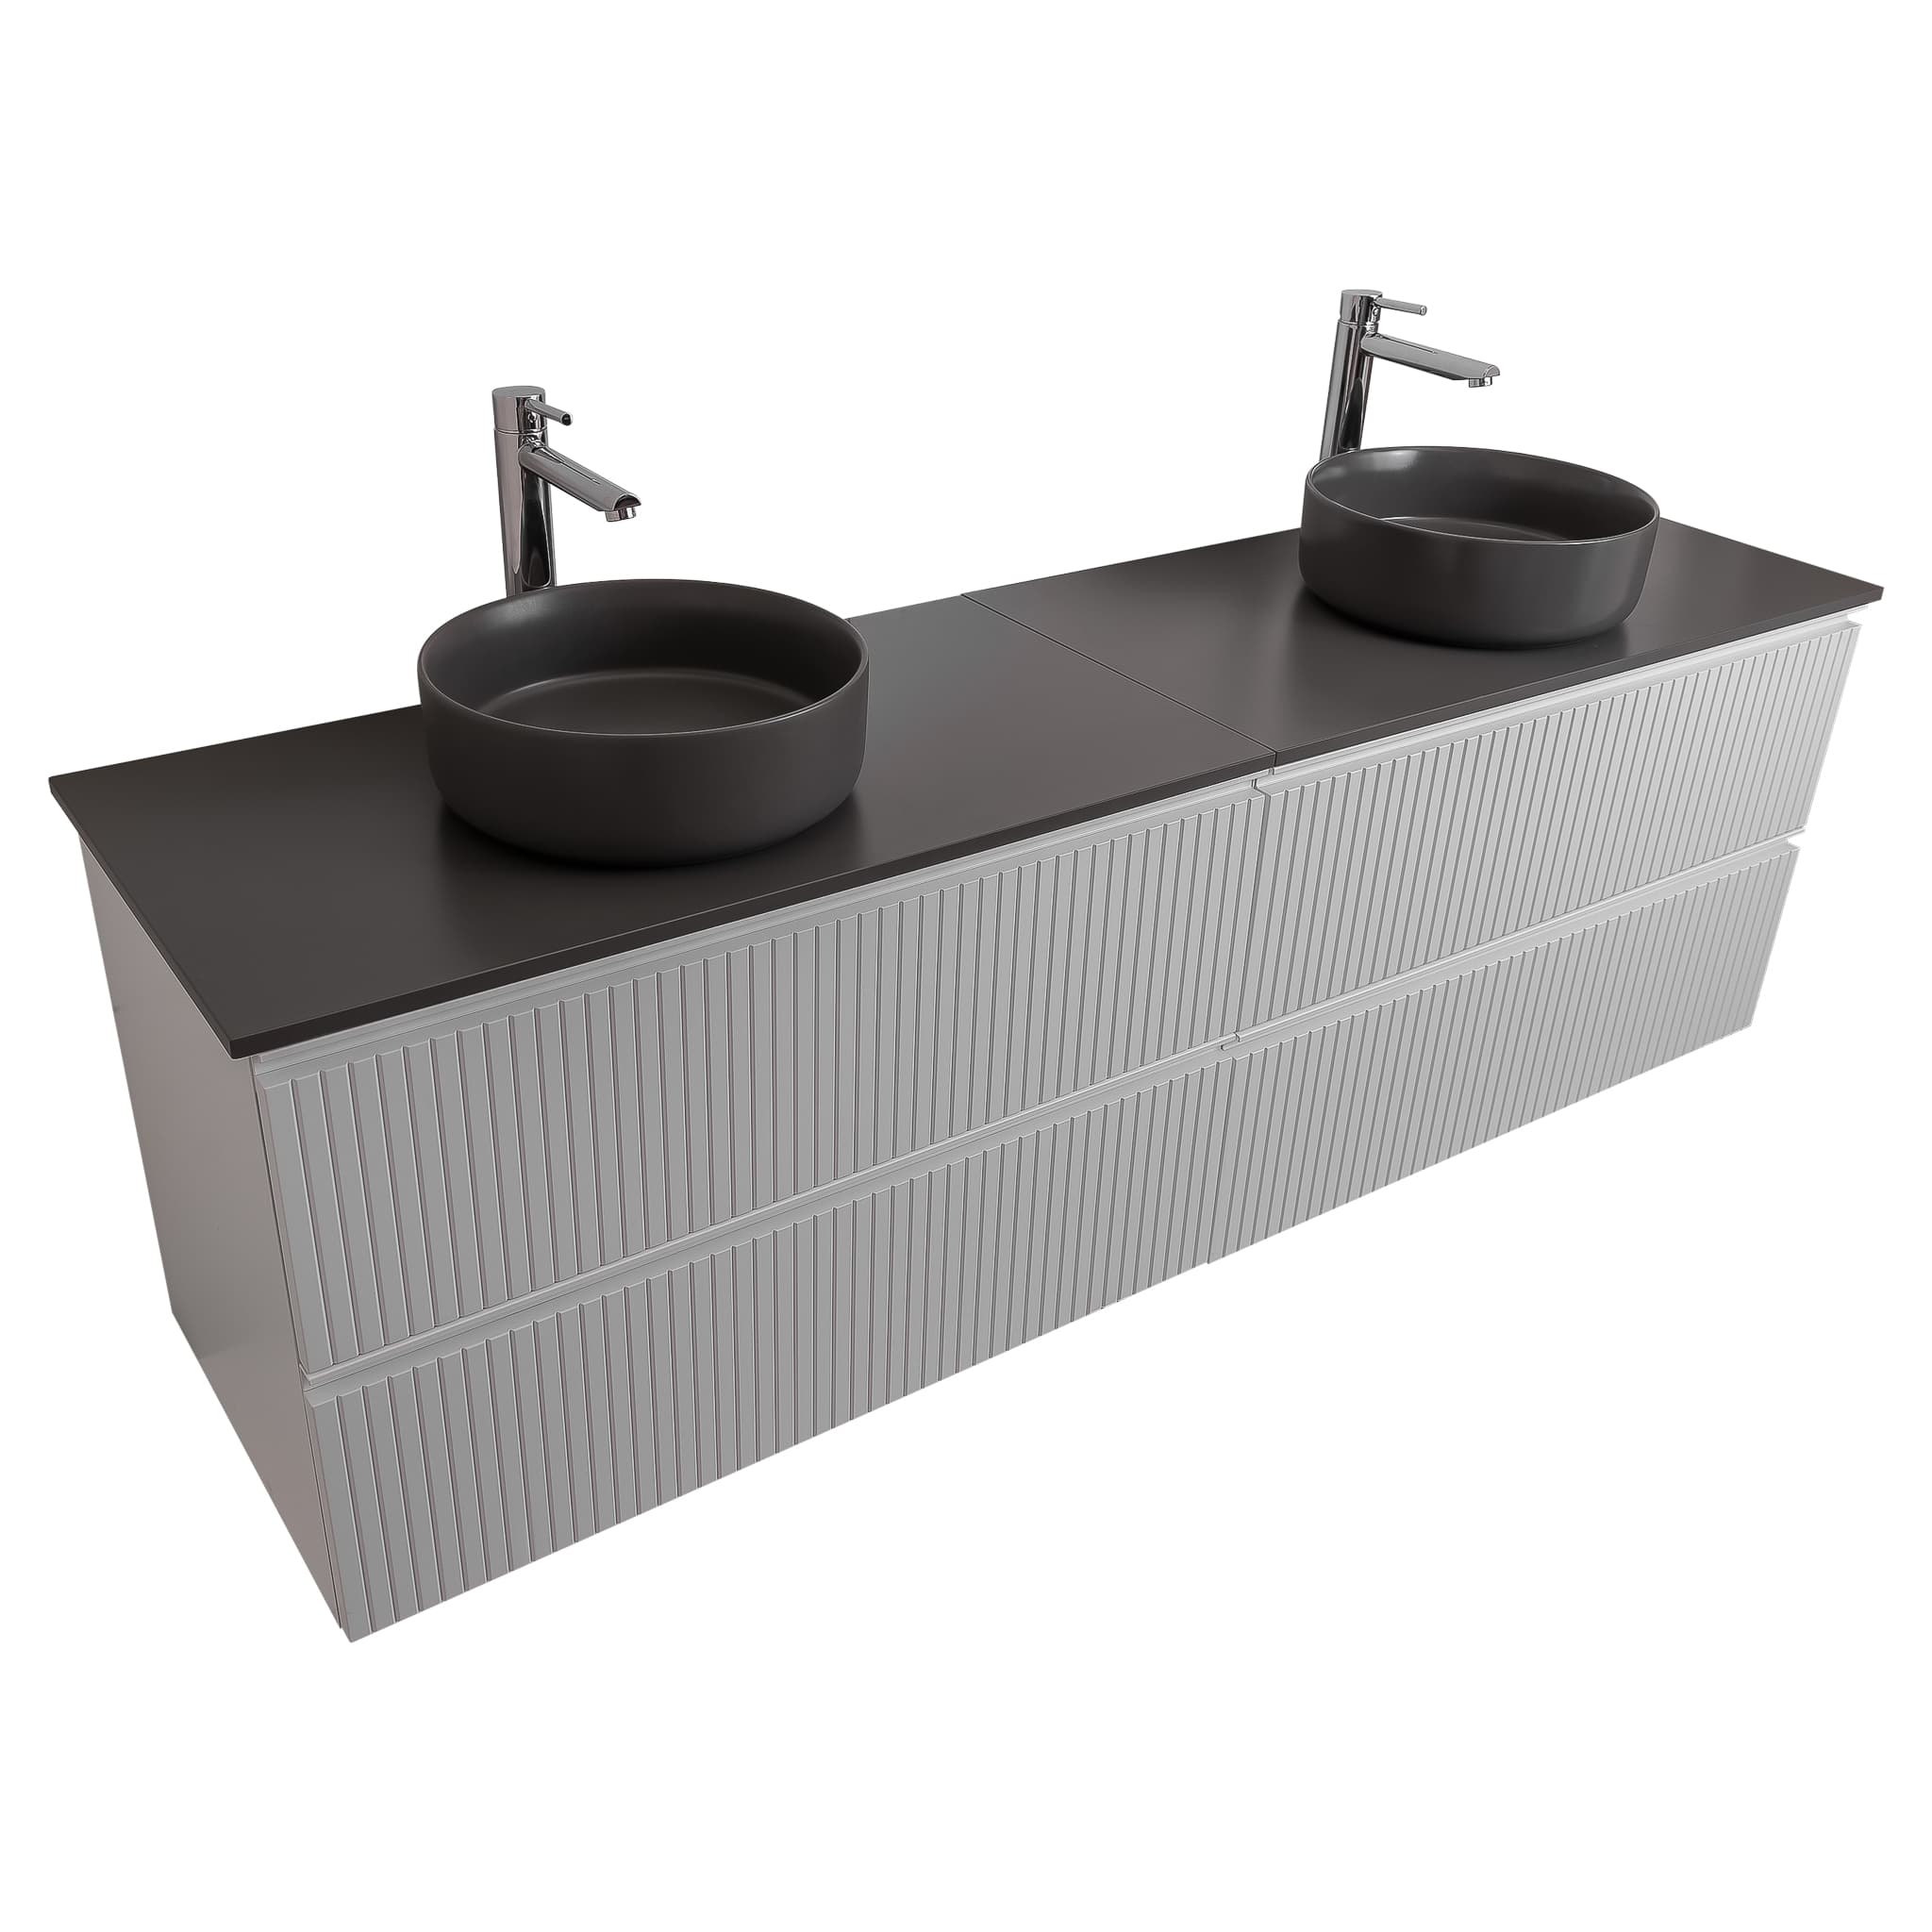 Ares 72 Matte White Cabinet, Ares Grey Ceniza Top And Two Ares Grey Ceniza Ceramic Basin, Wall Mounted Modern Vanity Set